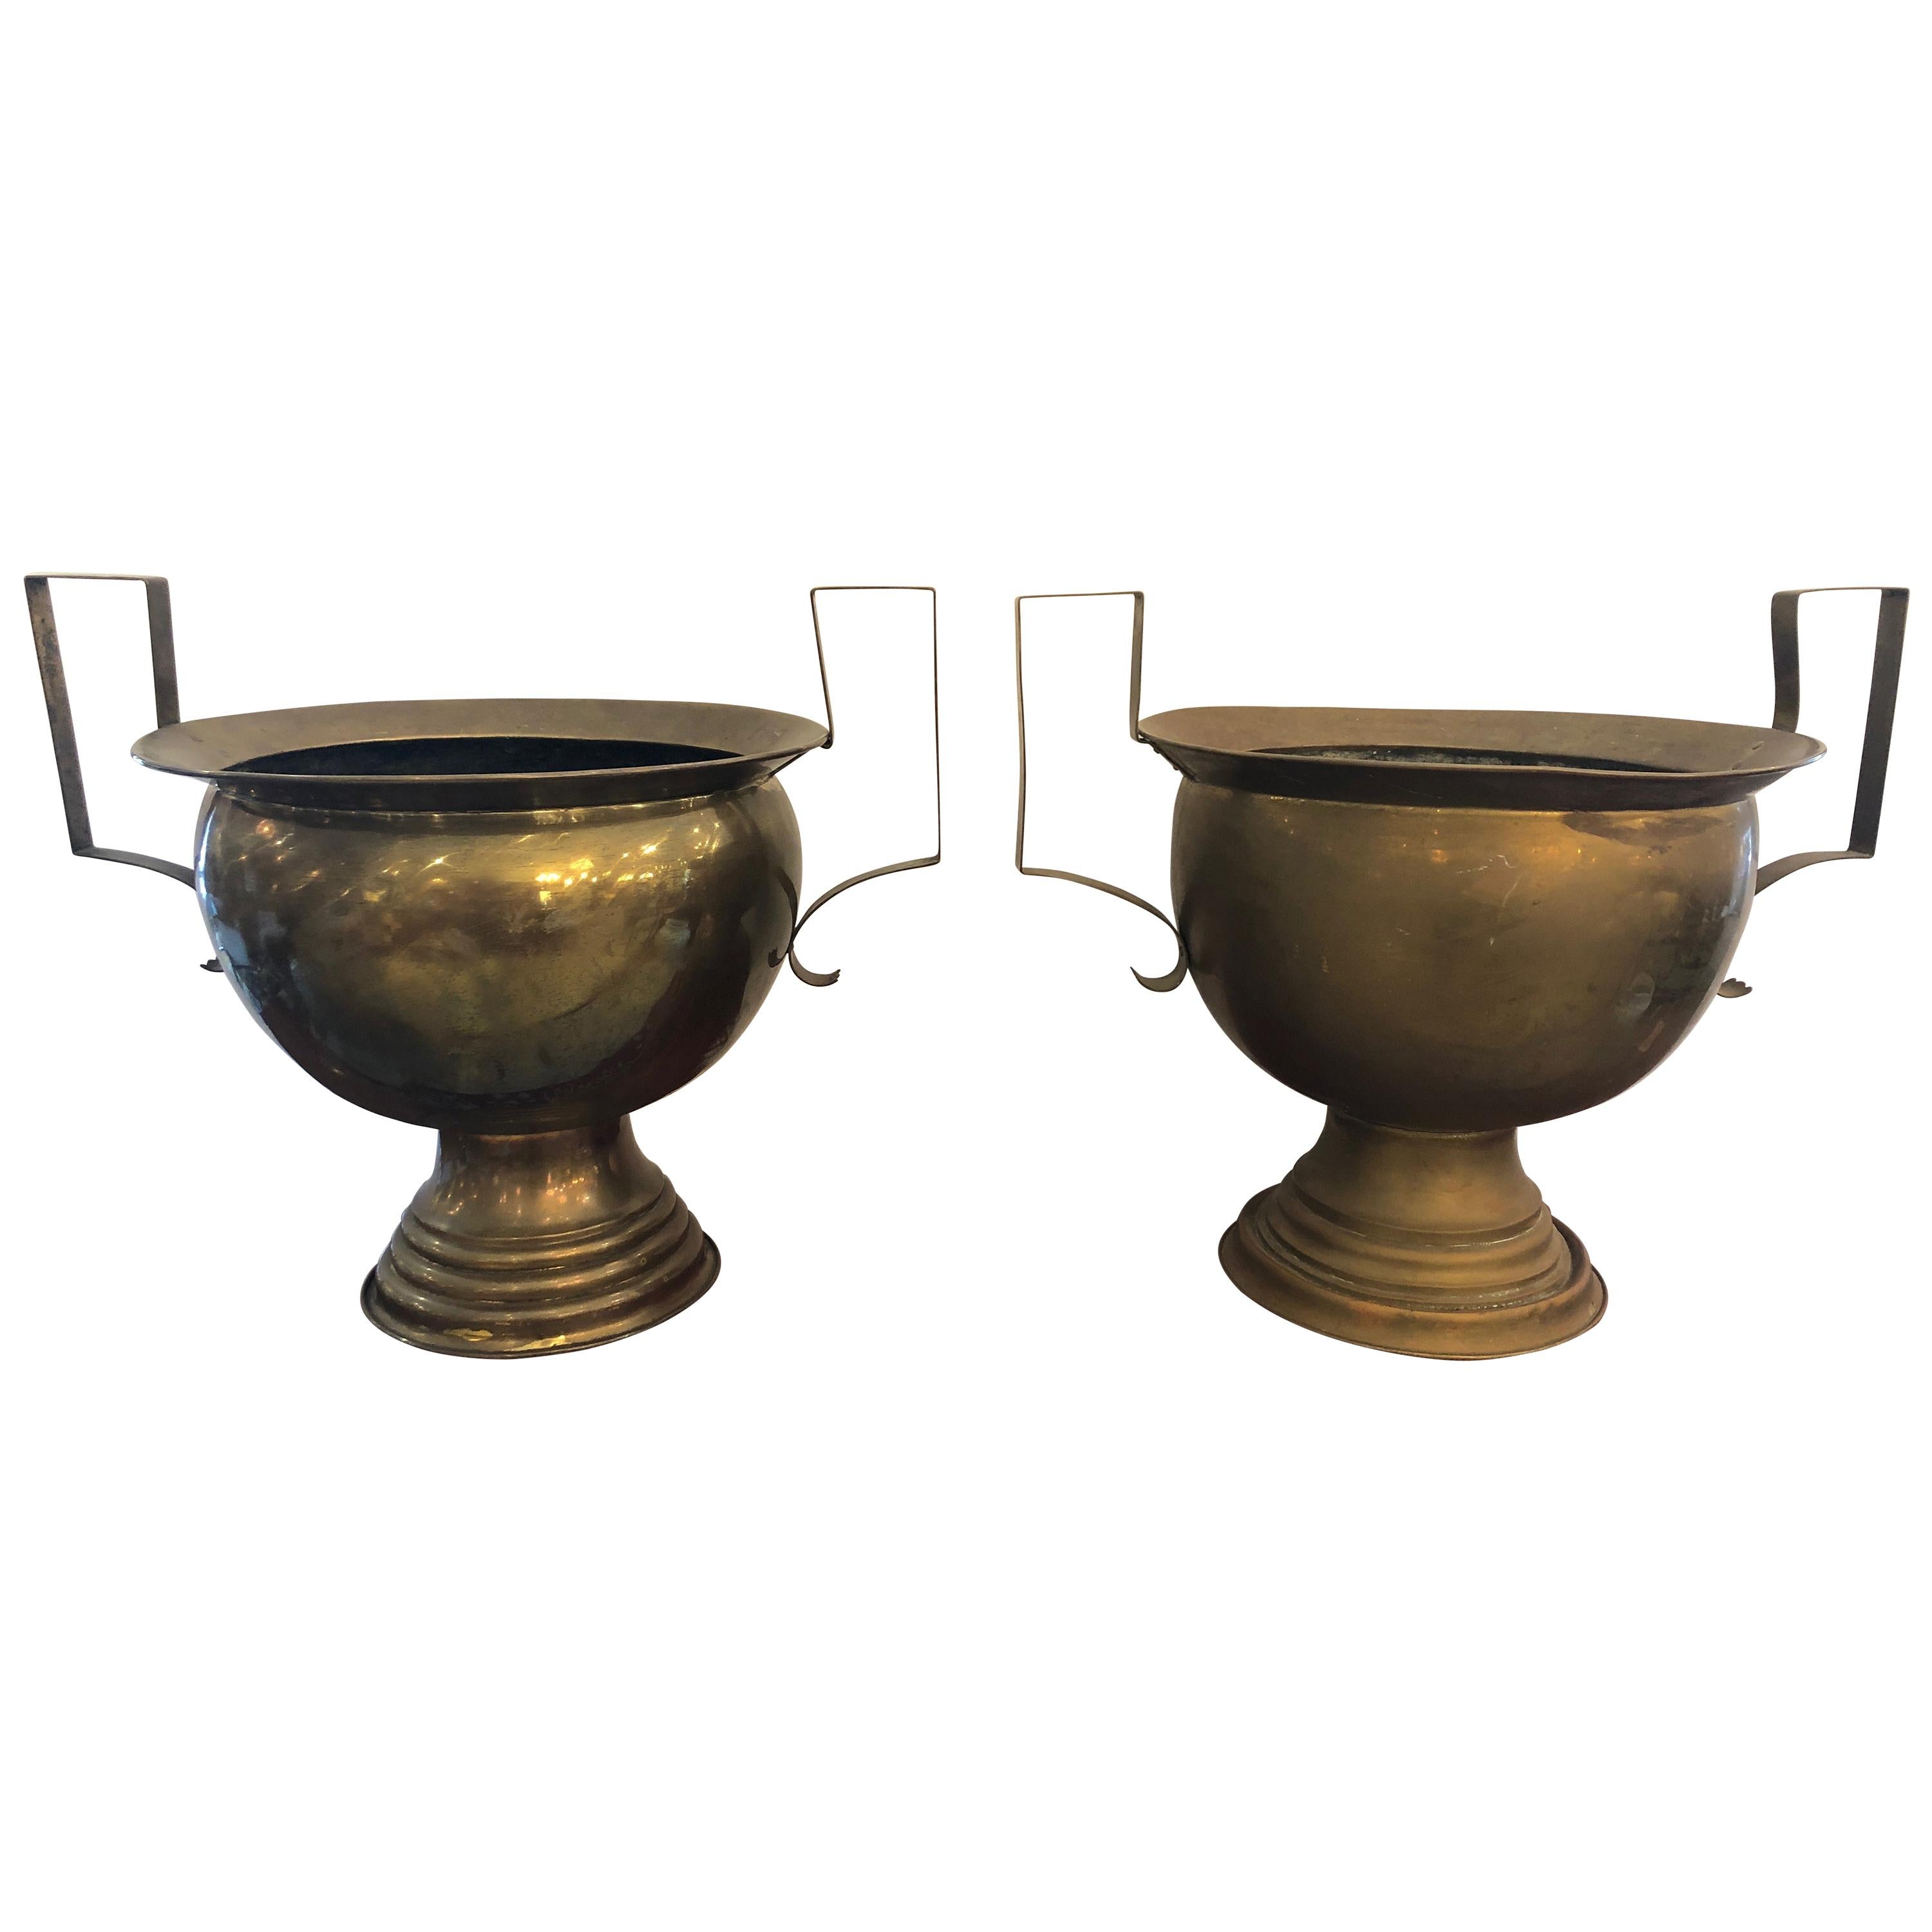 Very Large Pair of 19th Century French Brass Planters Urns or Centerpieces